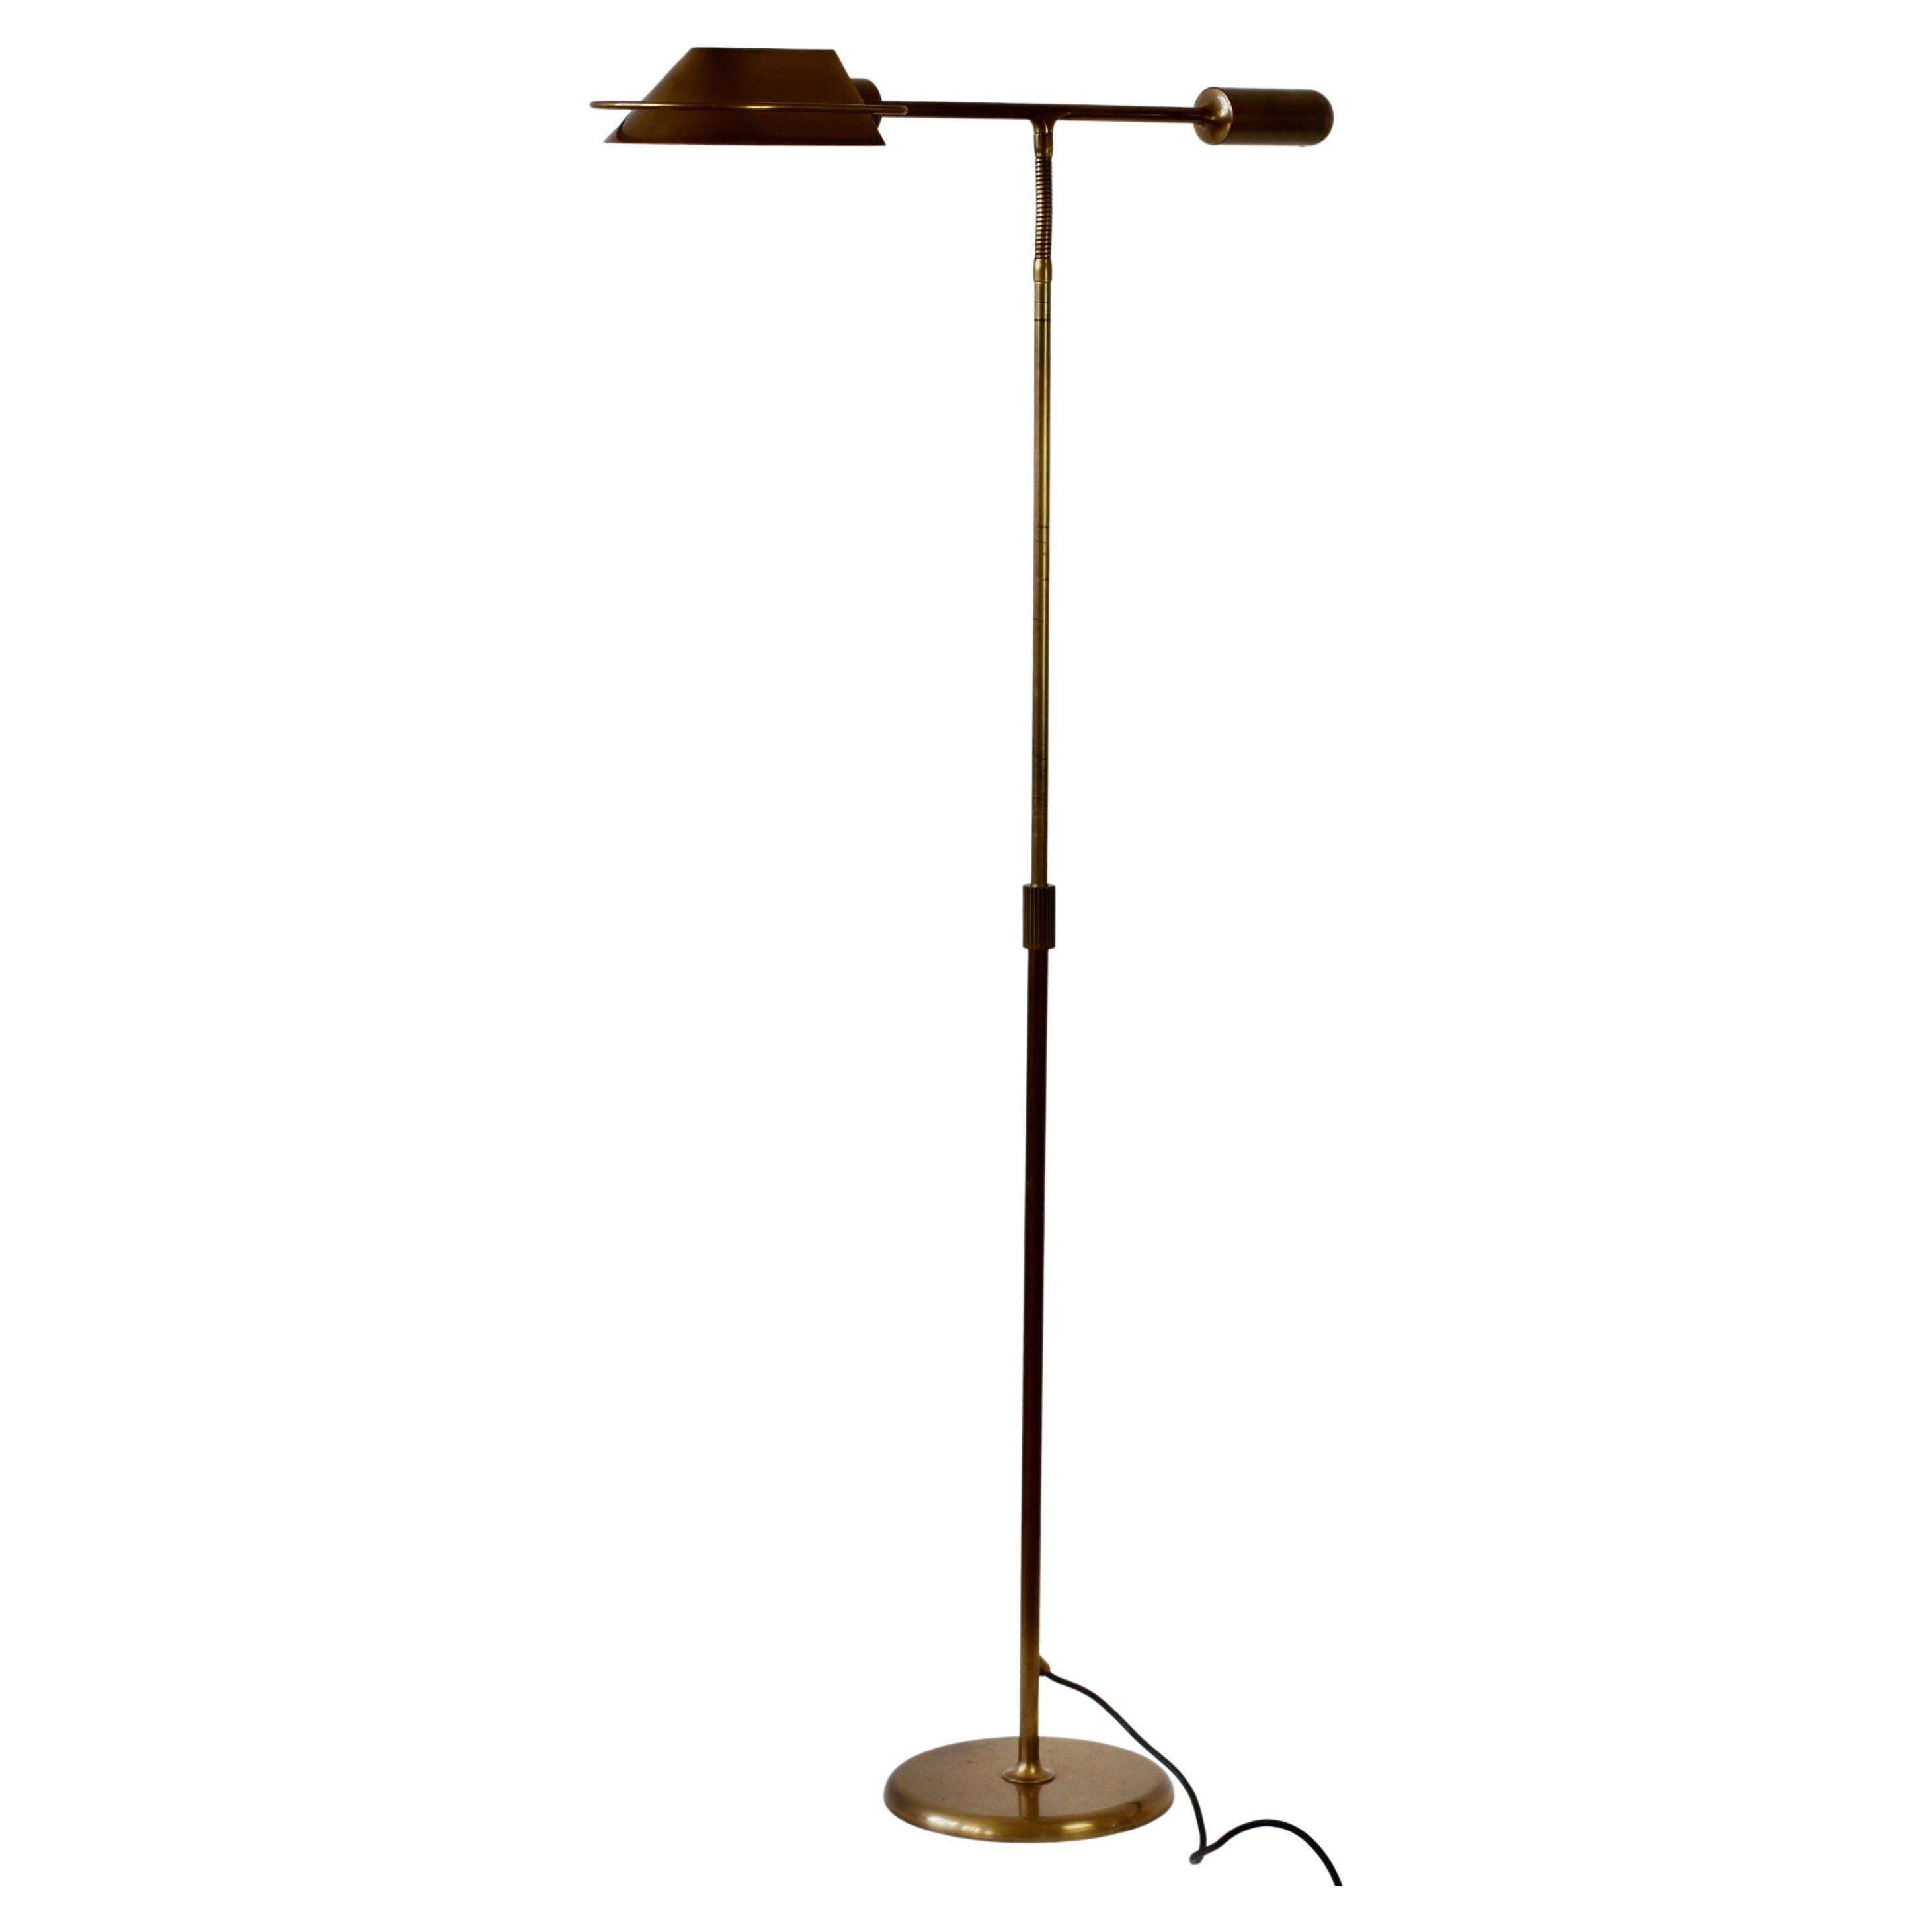 Extremely rare Mid-Century Modern vintage German made dimmable adjustable floor lamp by Florian Schulz circa late 1980s. Featuring a lacquered matt brushed brass finish with an adjustable shade and flexible neck making this the perfect modernist